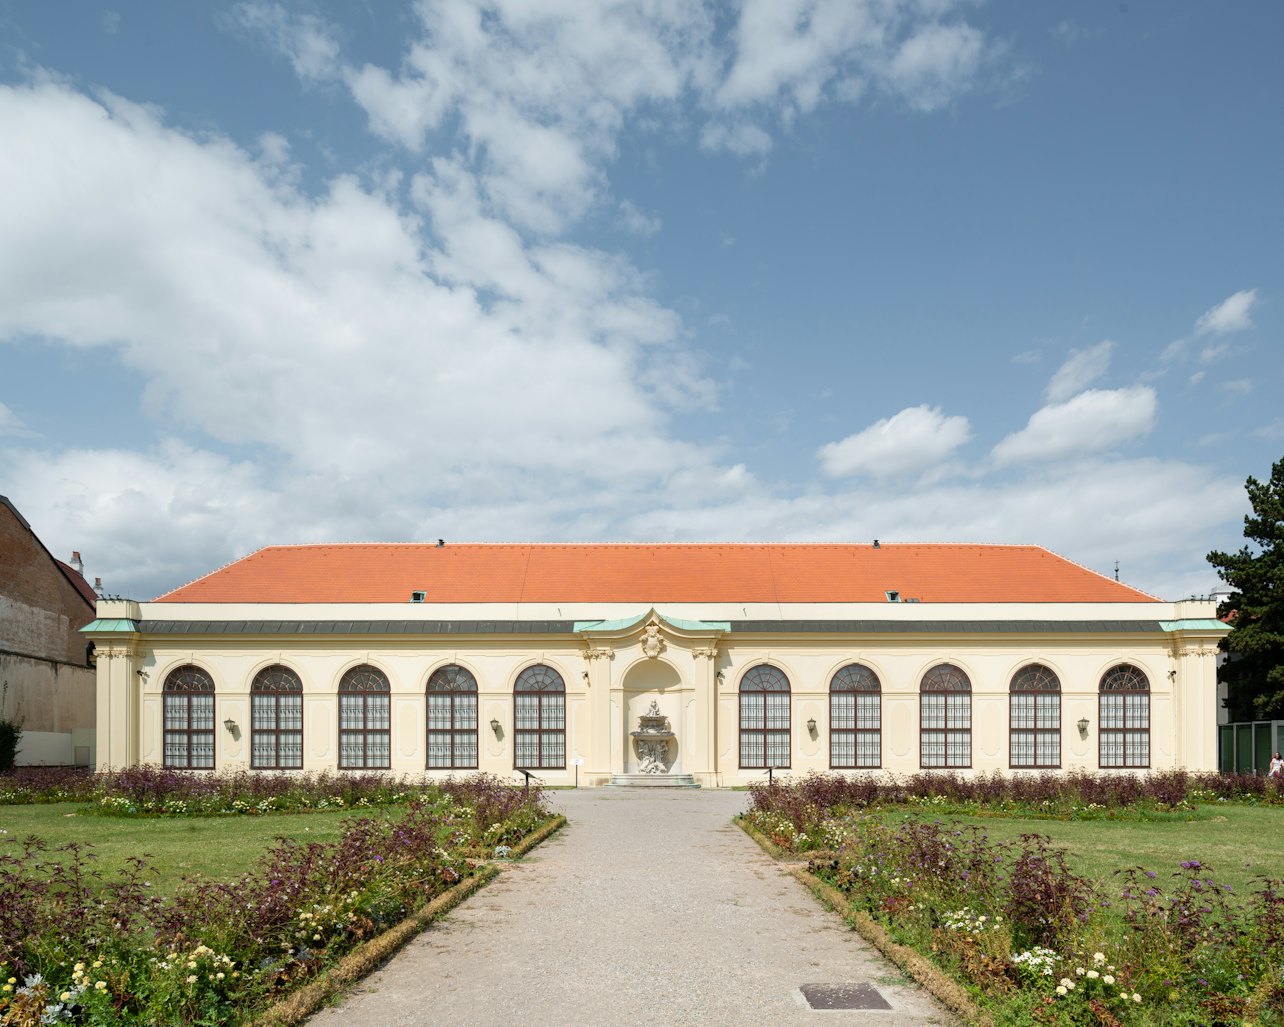 Belvedere Palace: Lower Belvedere - Accommodations in Vienna